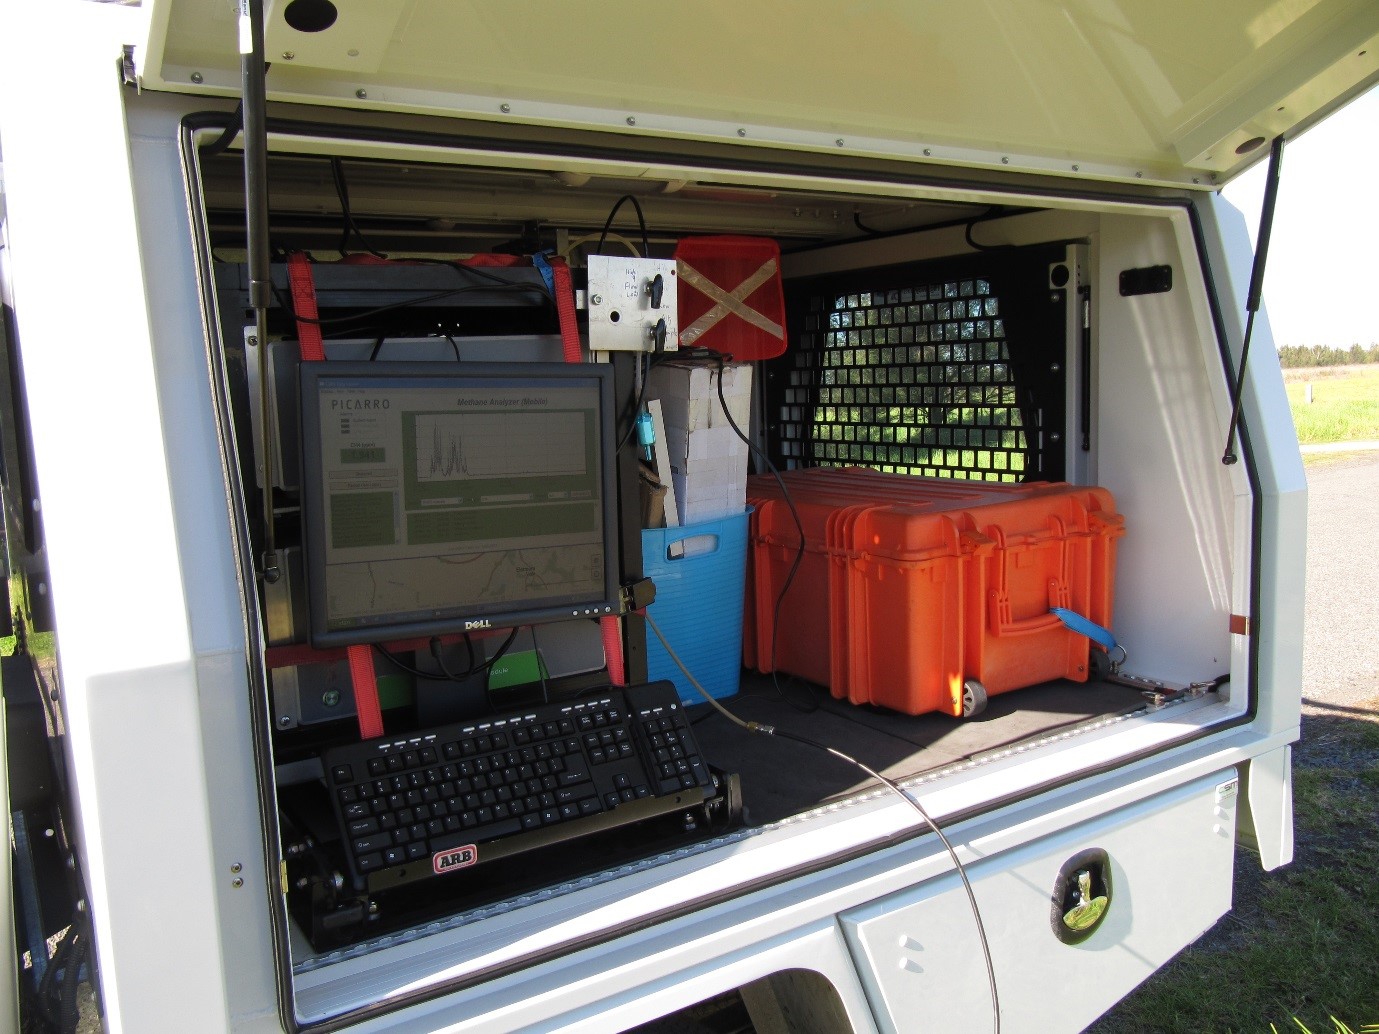 Monitoring equipment in back of utility vehicle